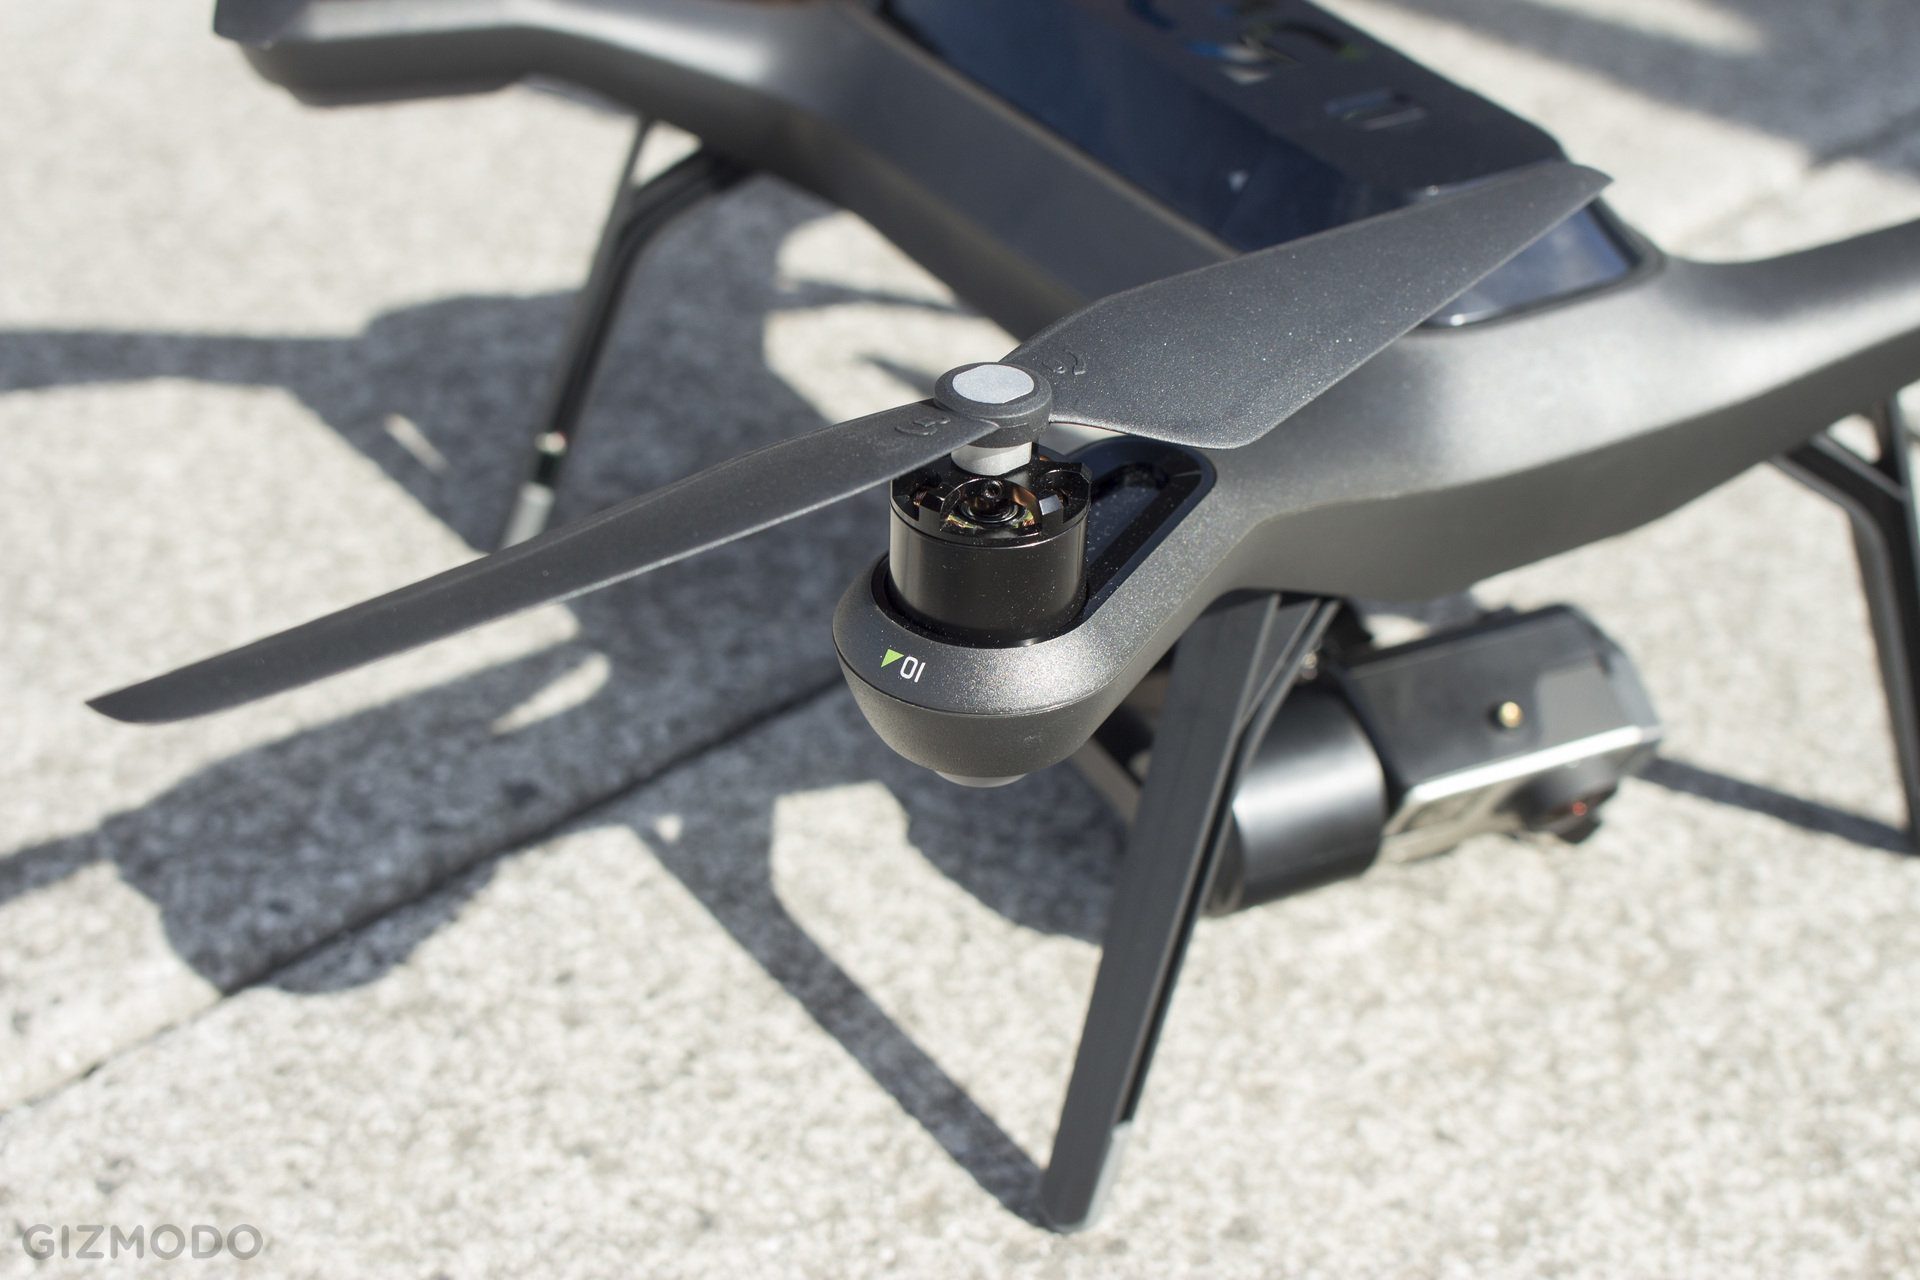 3DR’s New Solo Drone Promises Airborne Footage Without A Learning Curve